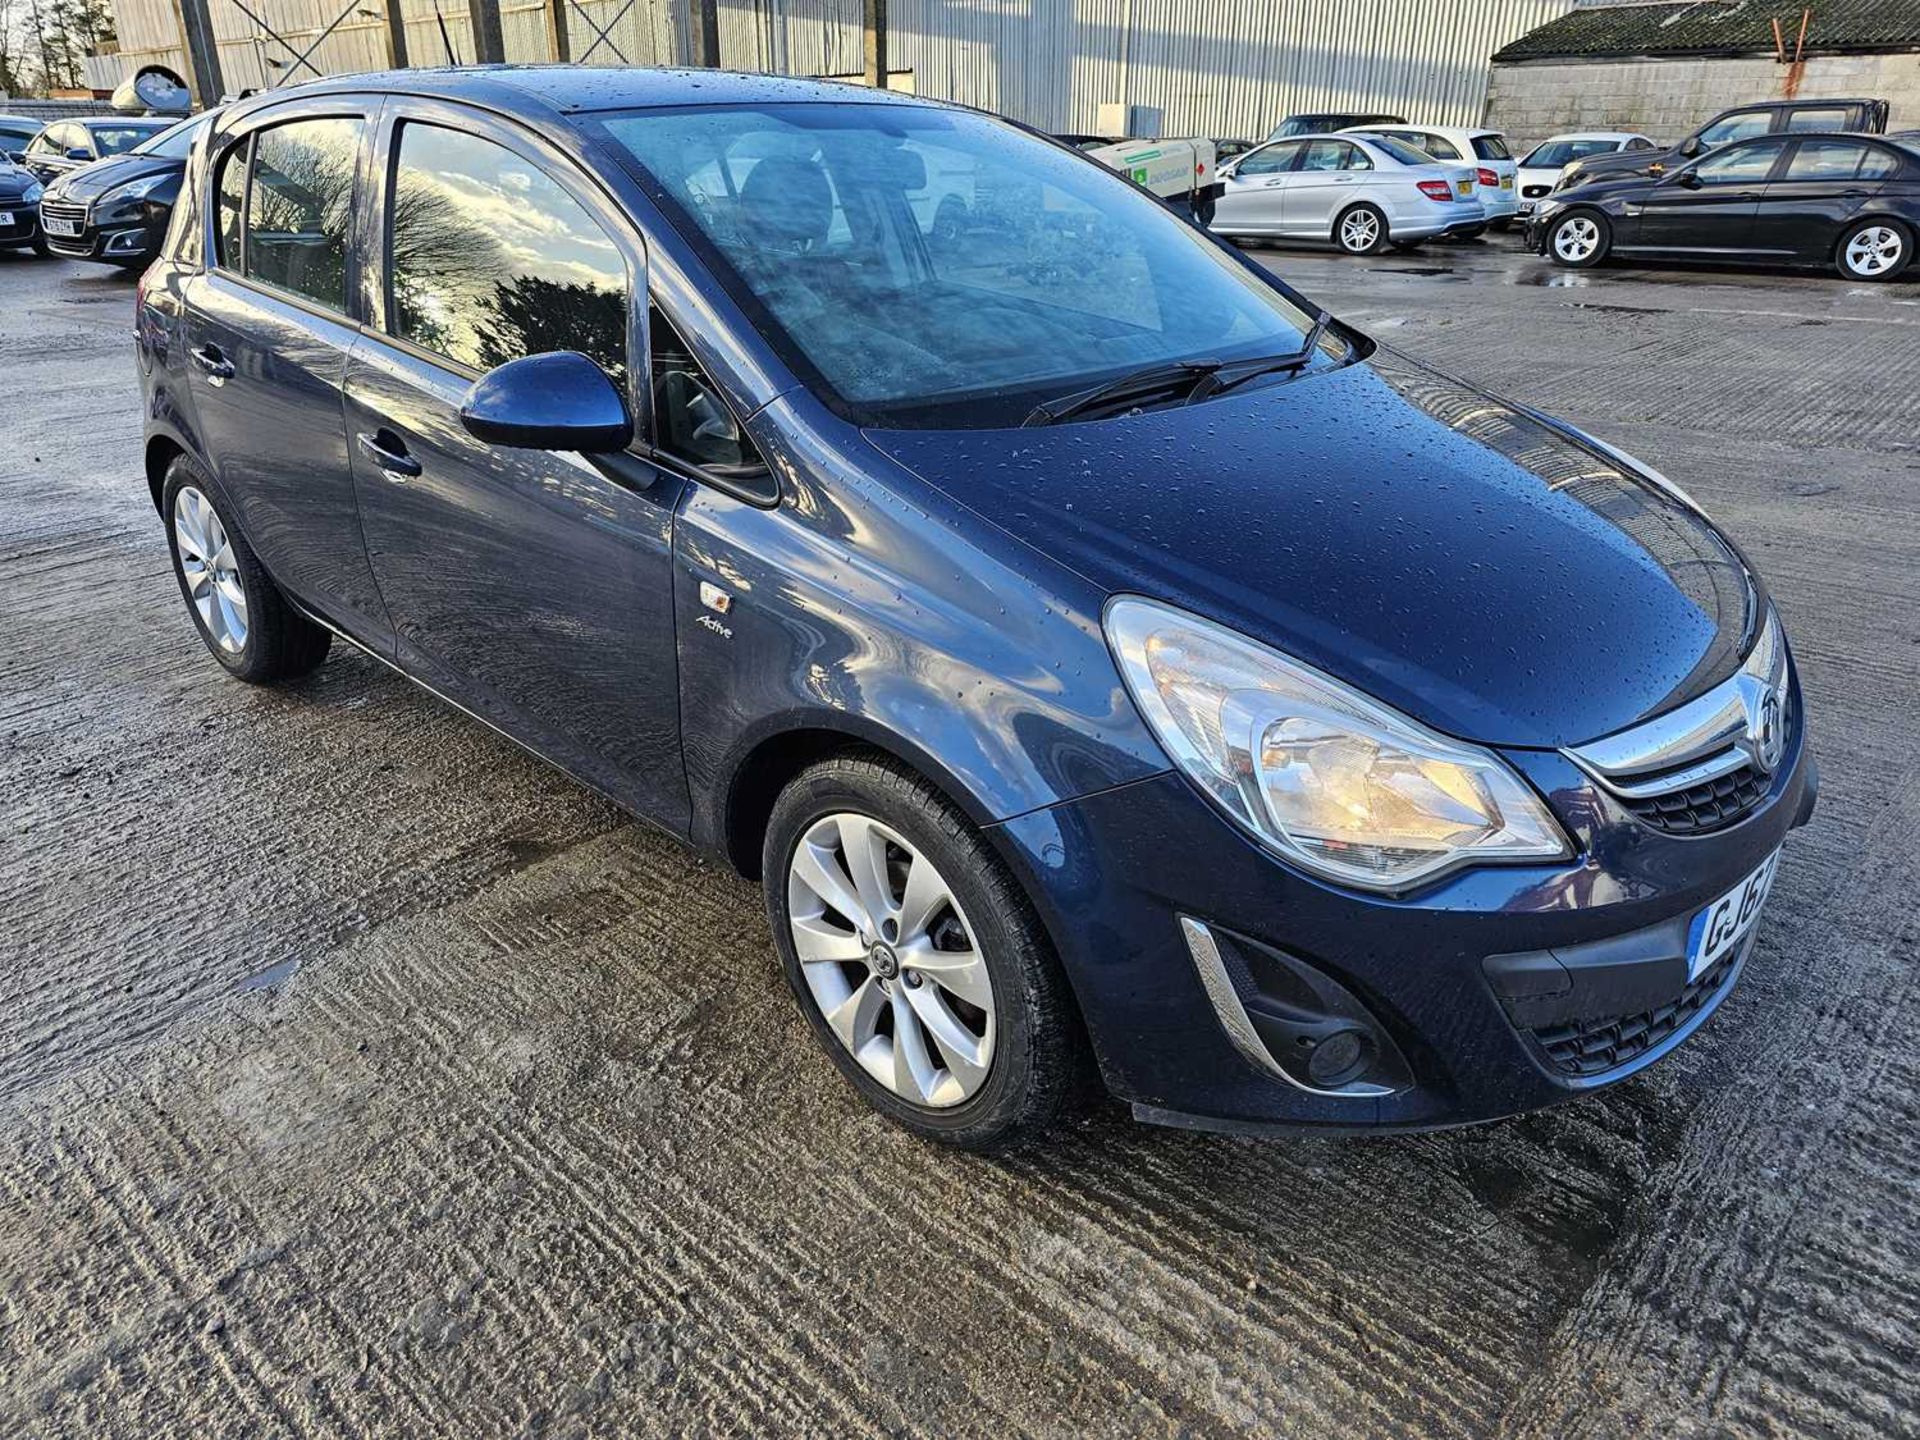 2012 Vauxhall Corsa Ecoflex, 5 Speed, A/C (Reg. Docs. & Service History Available, Tested 08/24) - Image 8 of 27